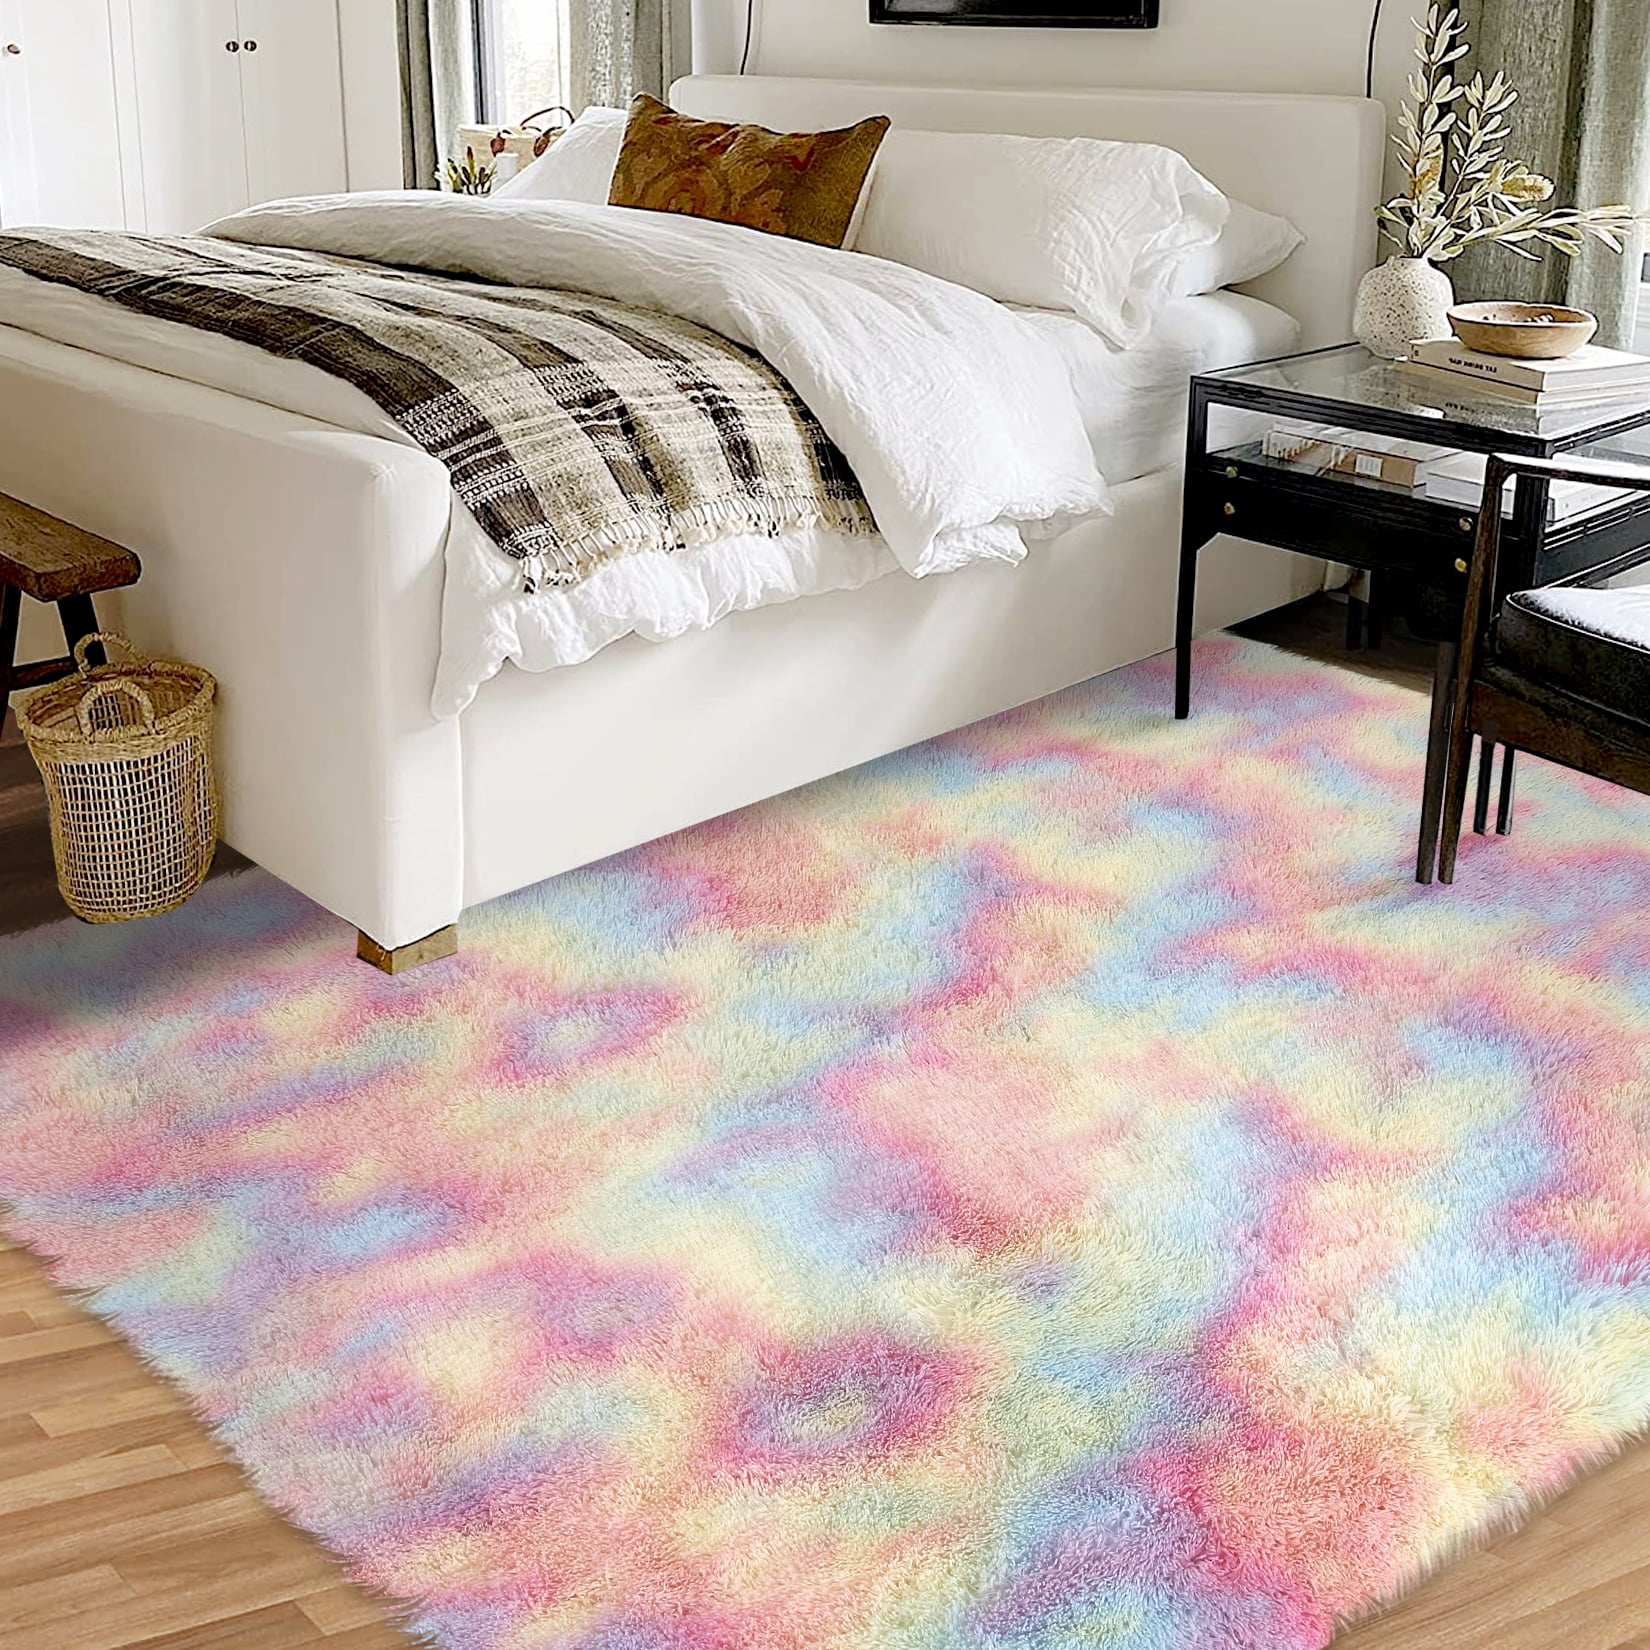 Kimicole Hot Pink Area Rug for Bedroom Living Room Carpet Home Decor, Upgraded 3x5 Cute Fluffy Rug for Apartment Dorm Room Essentials for Teen Girls